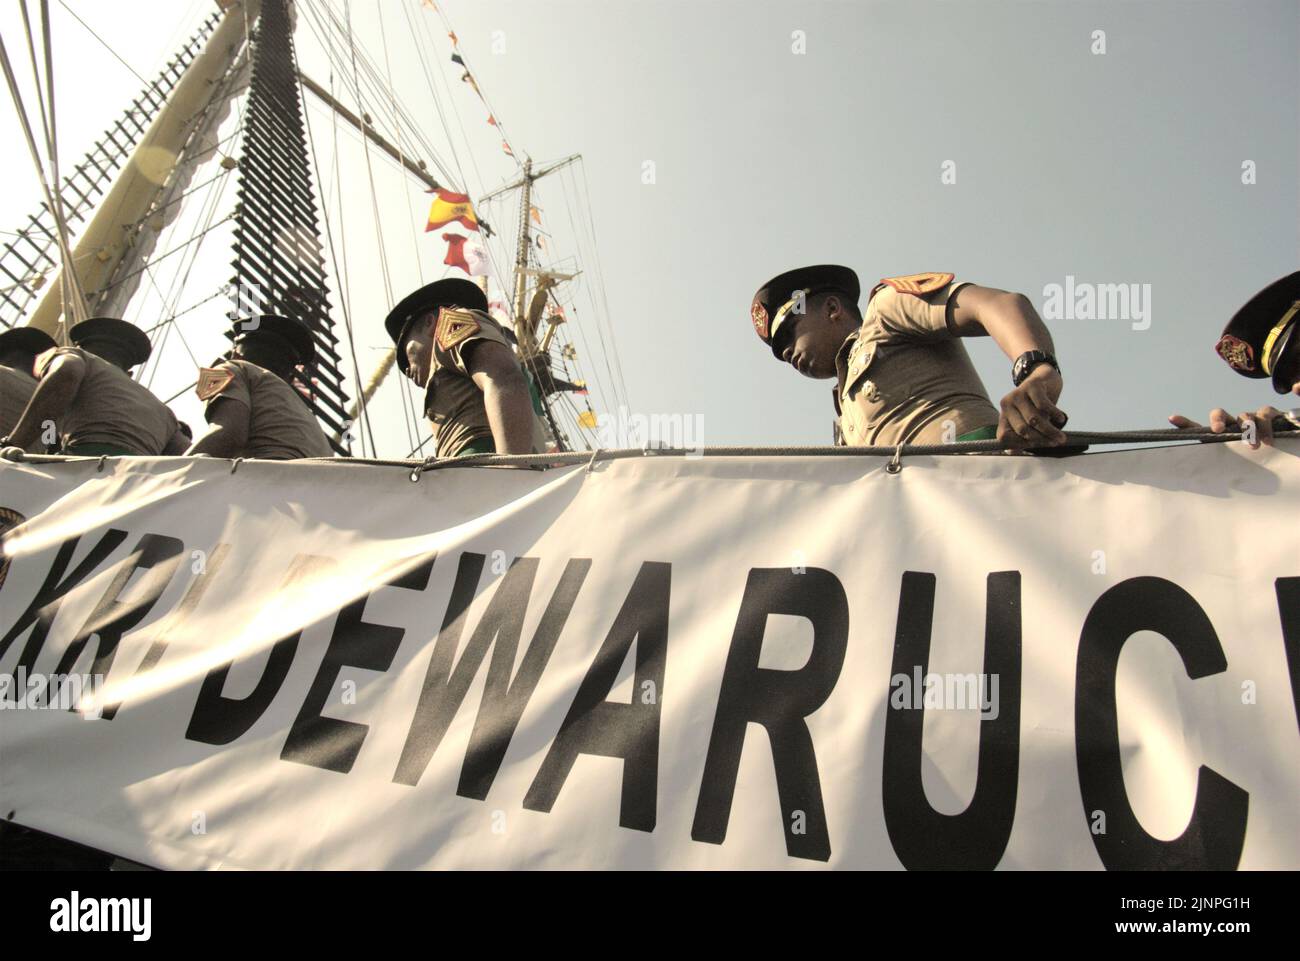 Indonesian navy cadets walking up the ladder of KRI Dewaruci (Dewa Ruci), an Indonesian tall ship, as the barquentine type schooner is opened for public visitors at Kolinlamil harbour (Navy harbour) in Tanjung Priok, North Jakarta, Jakarta, Indonesia. Stock Photo